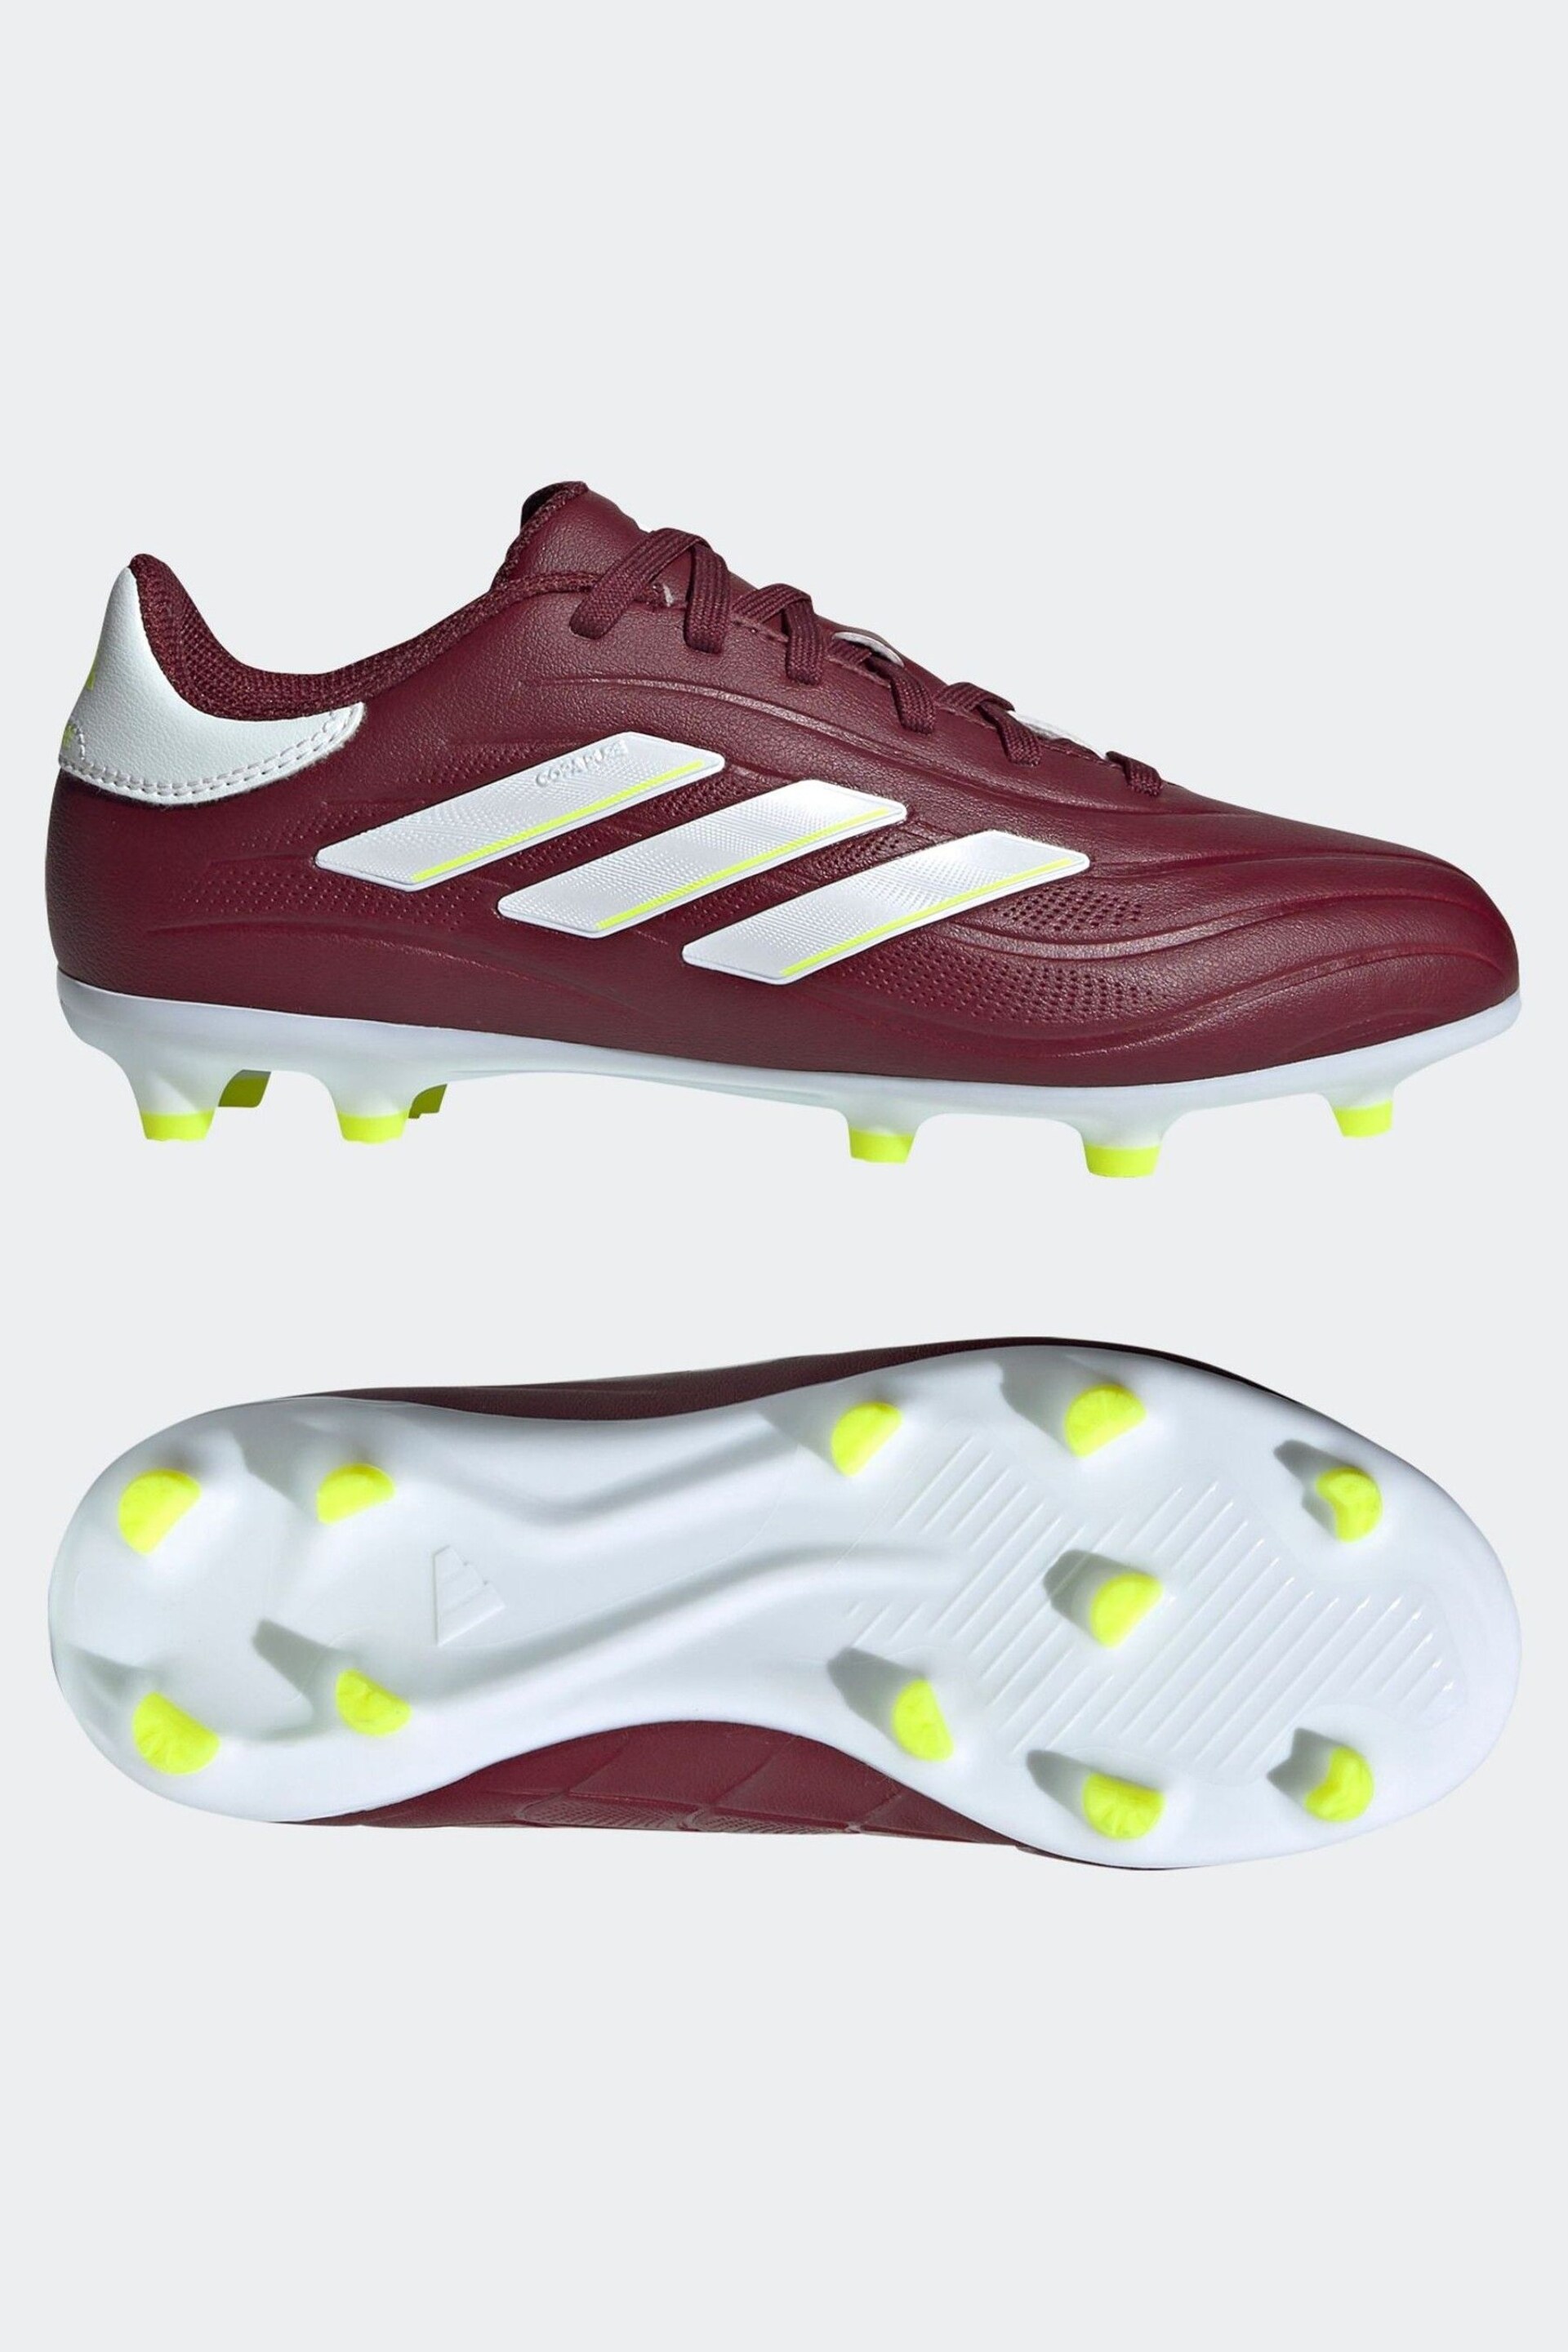 adidas Red/White Football Copa Pure II League Firm Ground Kids Boots - Image 3 of 12